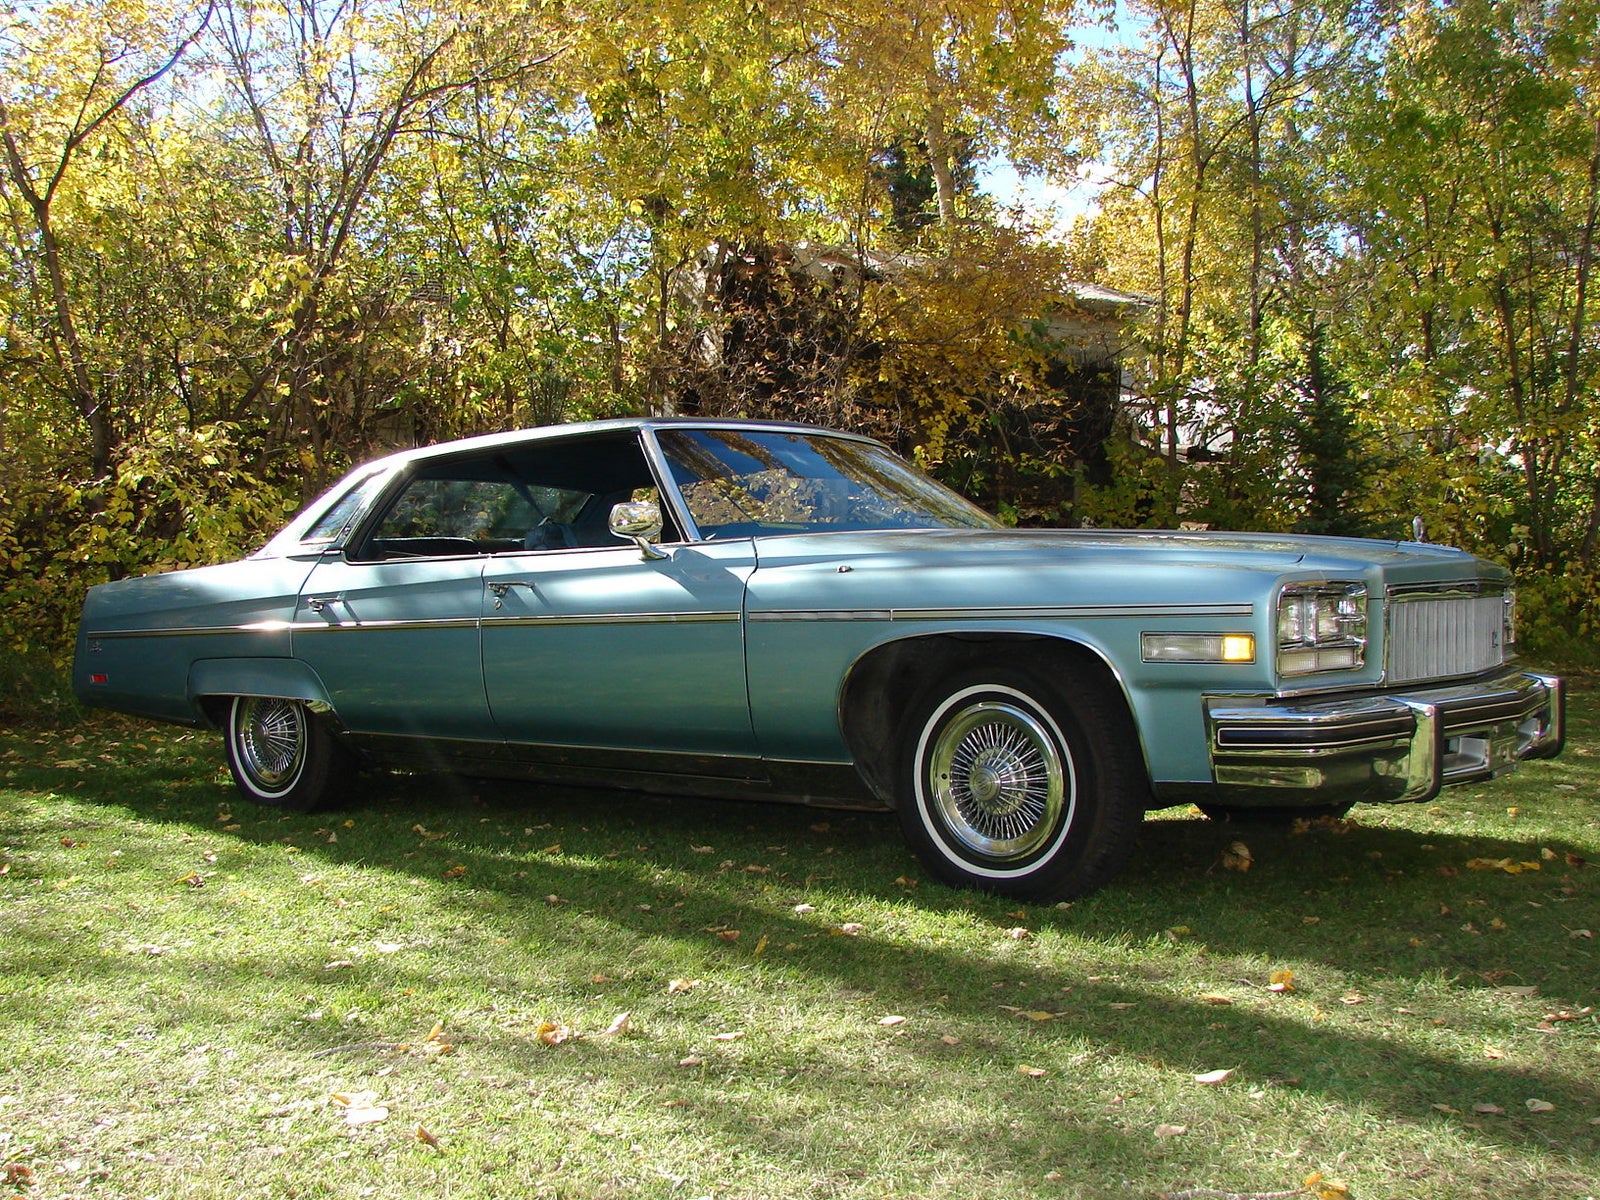 1976 Buick Electra - Pictures - 1976 buick electra limited - CarGurus